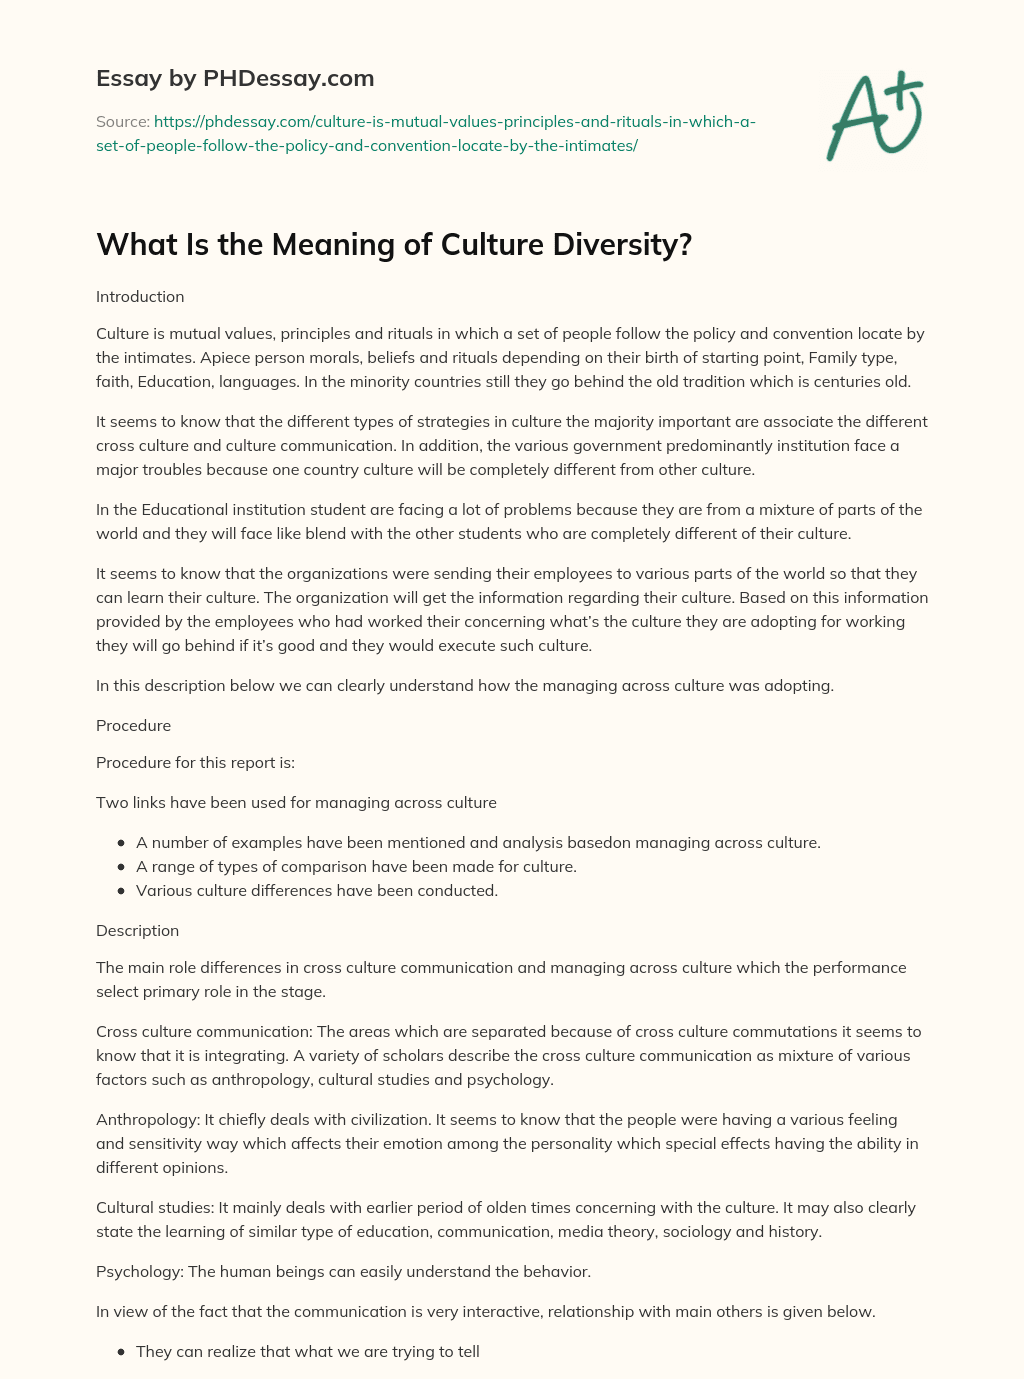 What Is the Meaning of Culture Diversity? essay